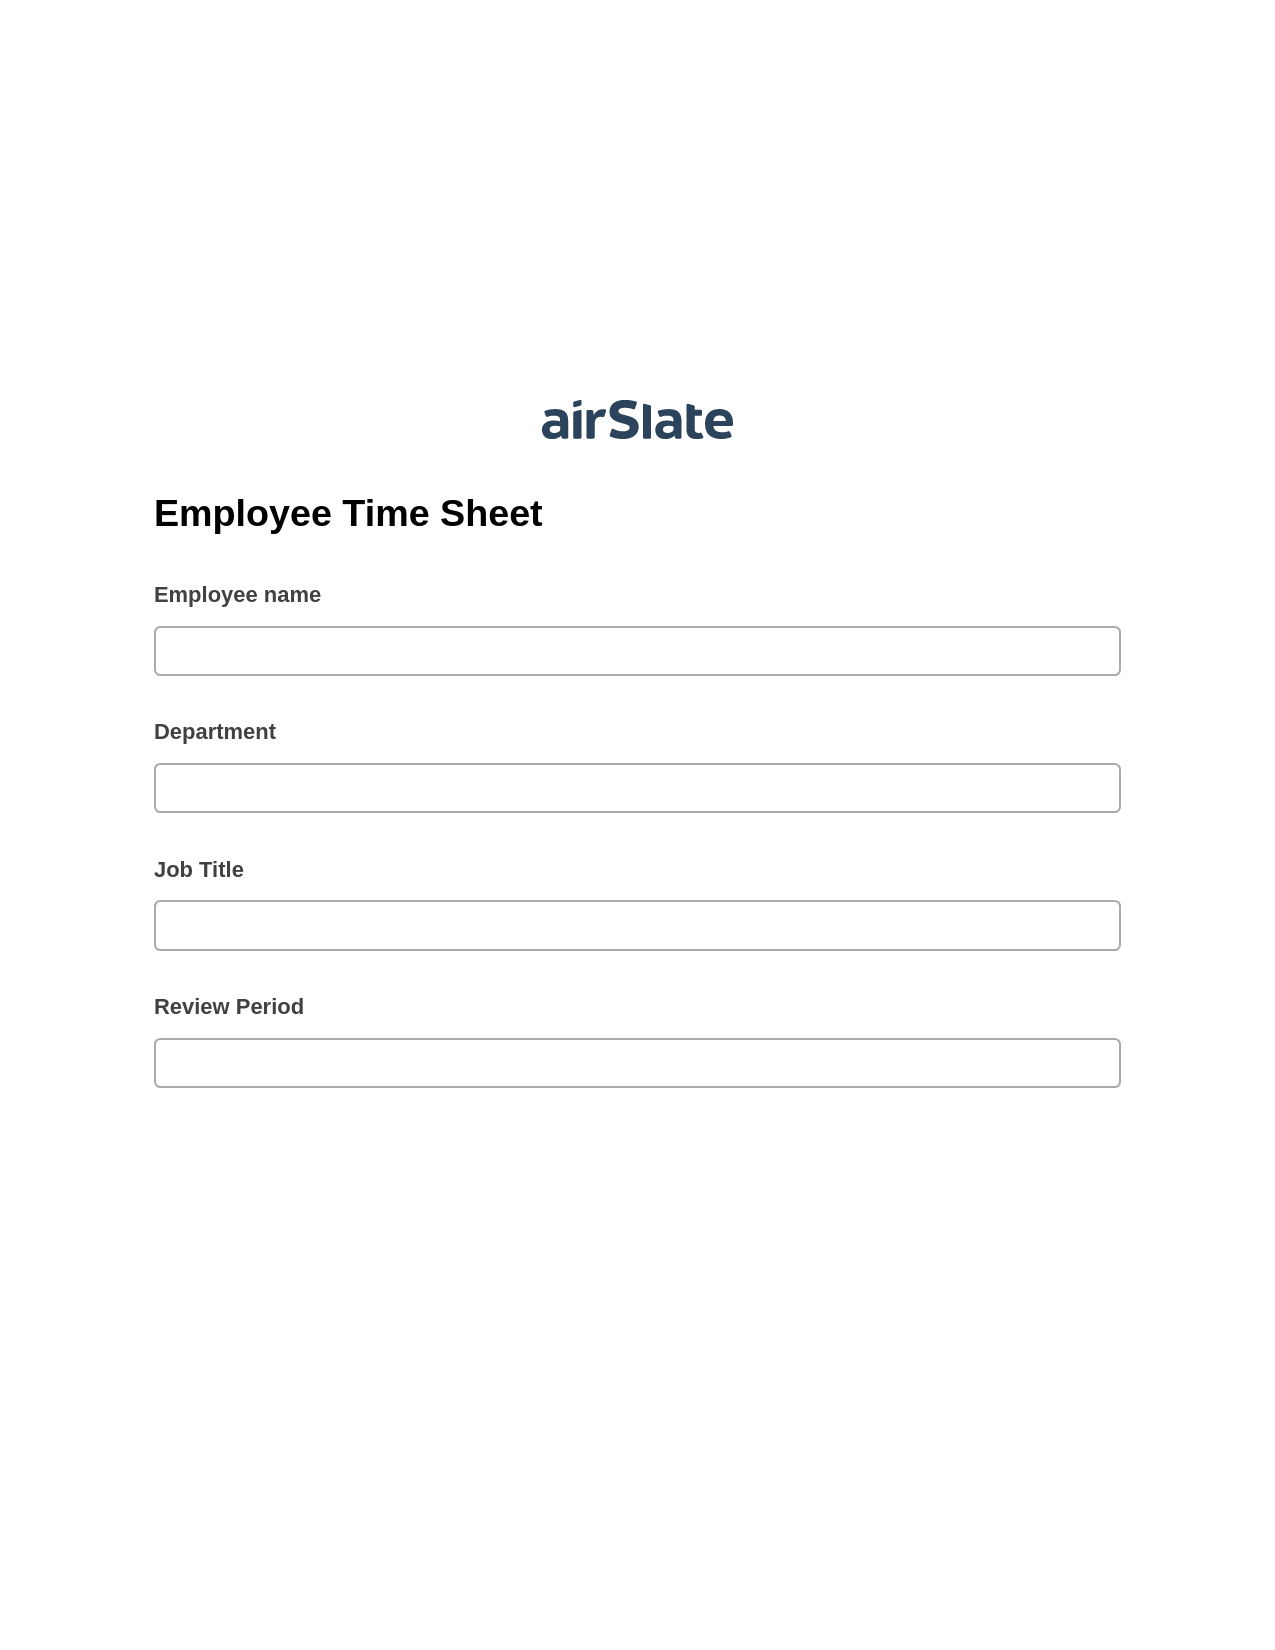 Employee Time Sheet Pre-fill Dropdowns from Google Sheet Bot, Update MS Dynamics 365 Record Bot, Post-finish Document Bot